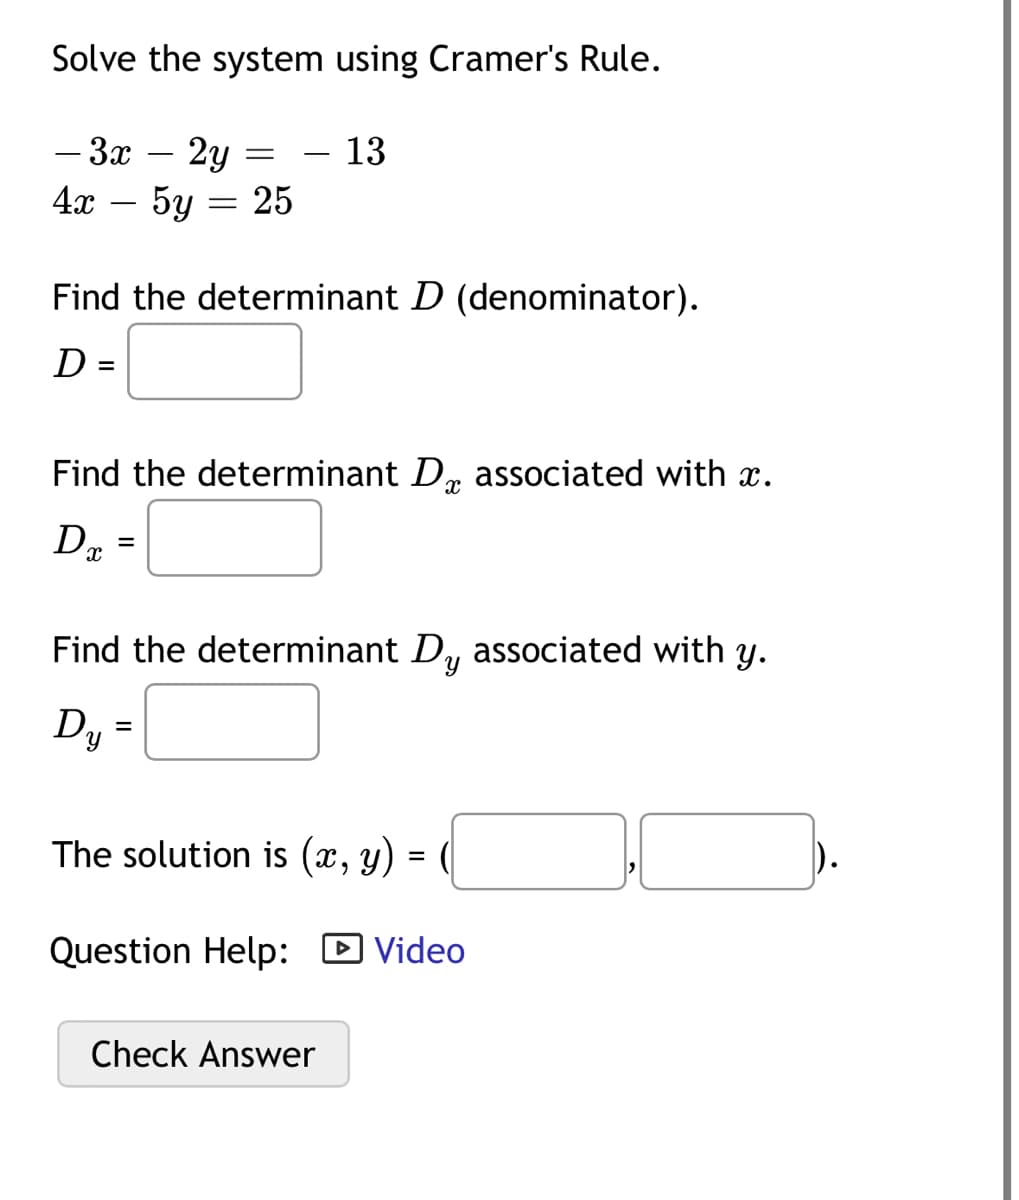 Solve the system using Cramer's Rule.
13
- 3x 2y
4x - 5y = 25
Find the determinant D (denominator).
D =
=
Find the determinant D associated with x.
X
Dx
=
Find the determinant Dy associated with y.
Dy =
The solution is (x, y) = (
Question Help: ► Video
Check Answer